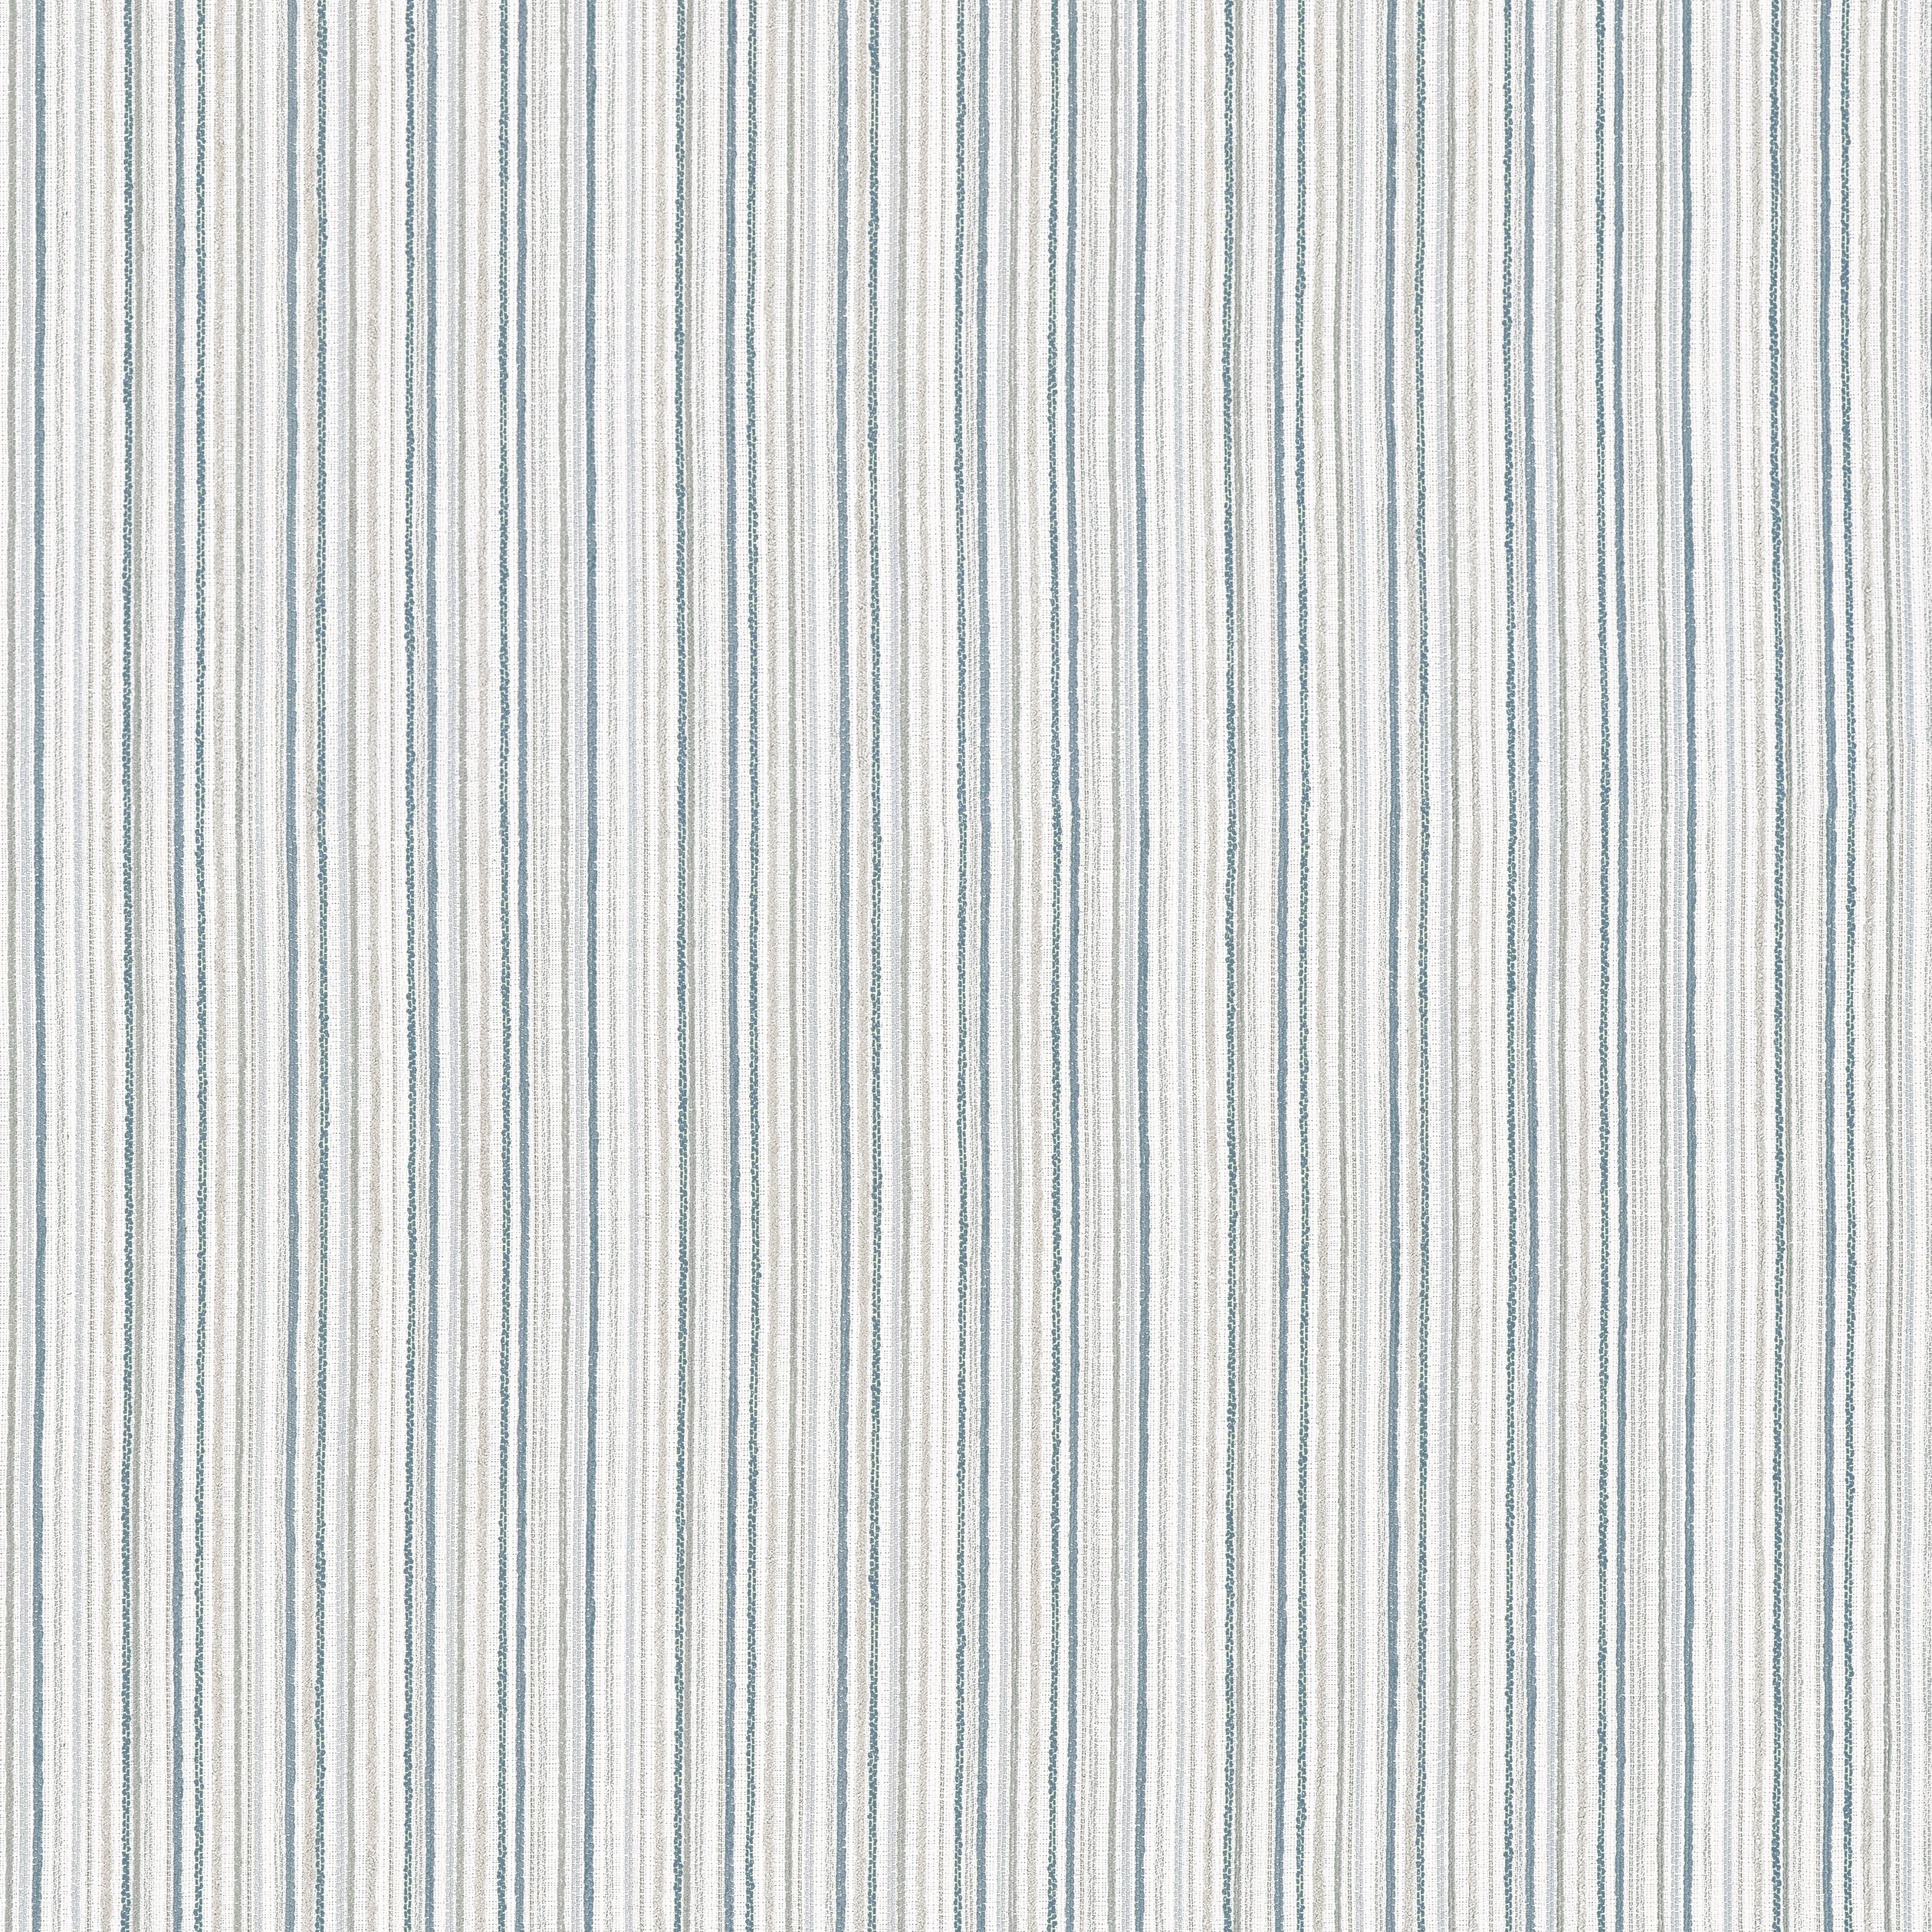 Ernie Stripe fabric in true blue color - pattern number W81944 - by Thibaut in the Companions collection